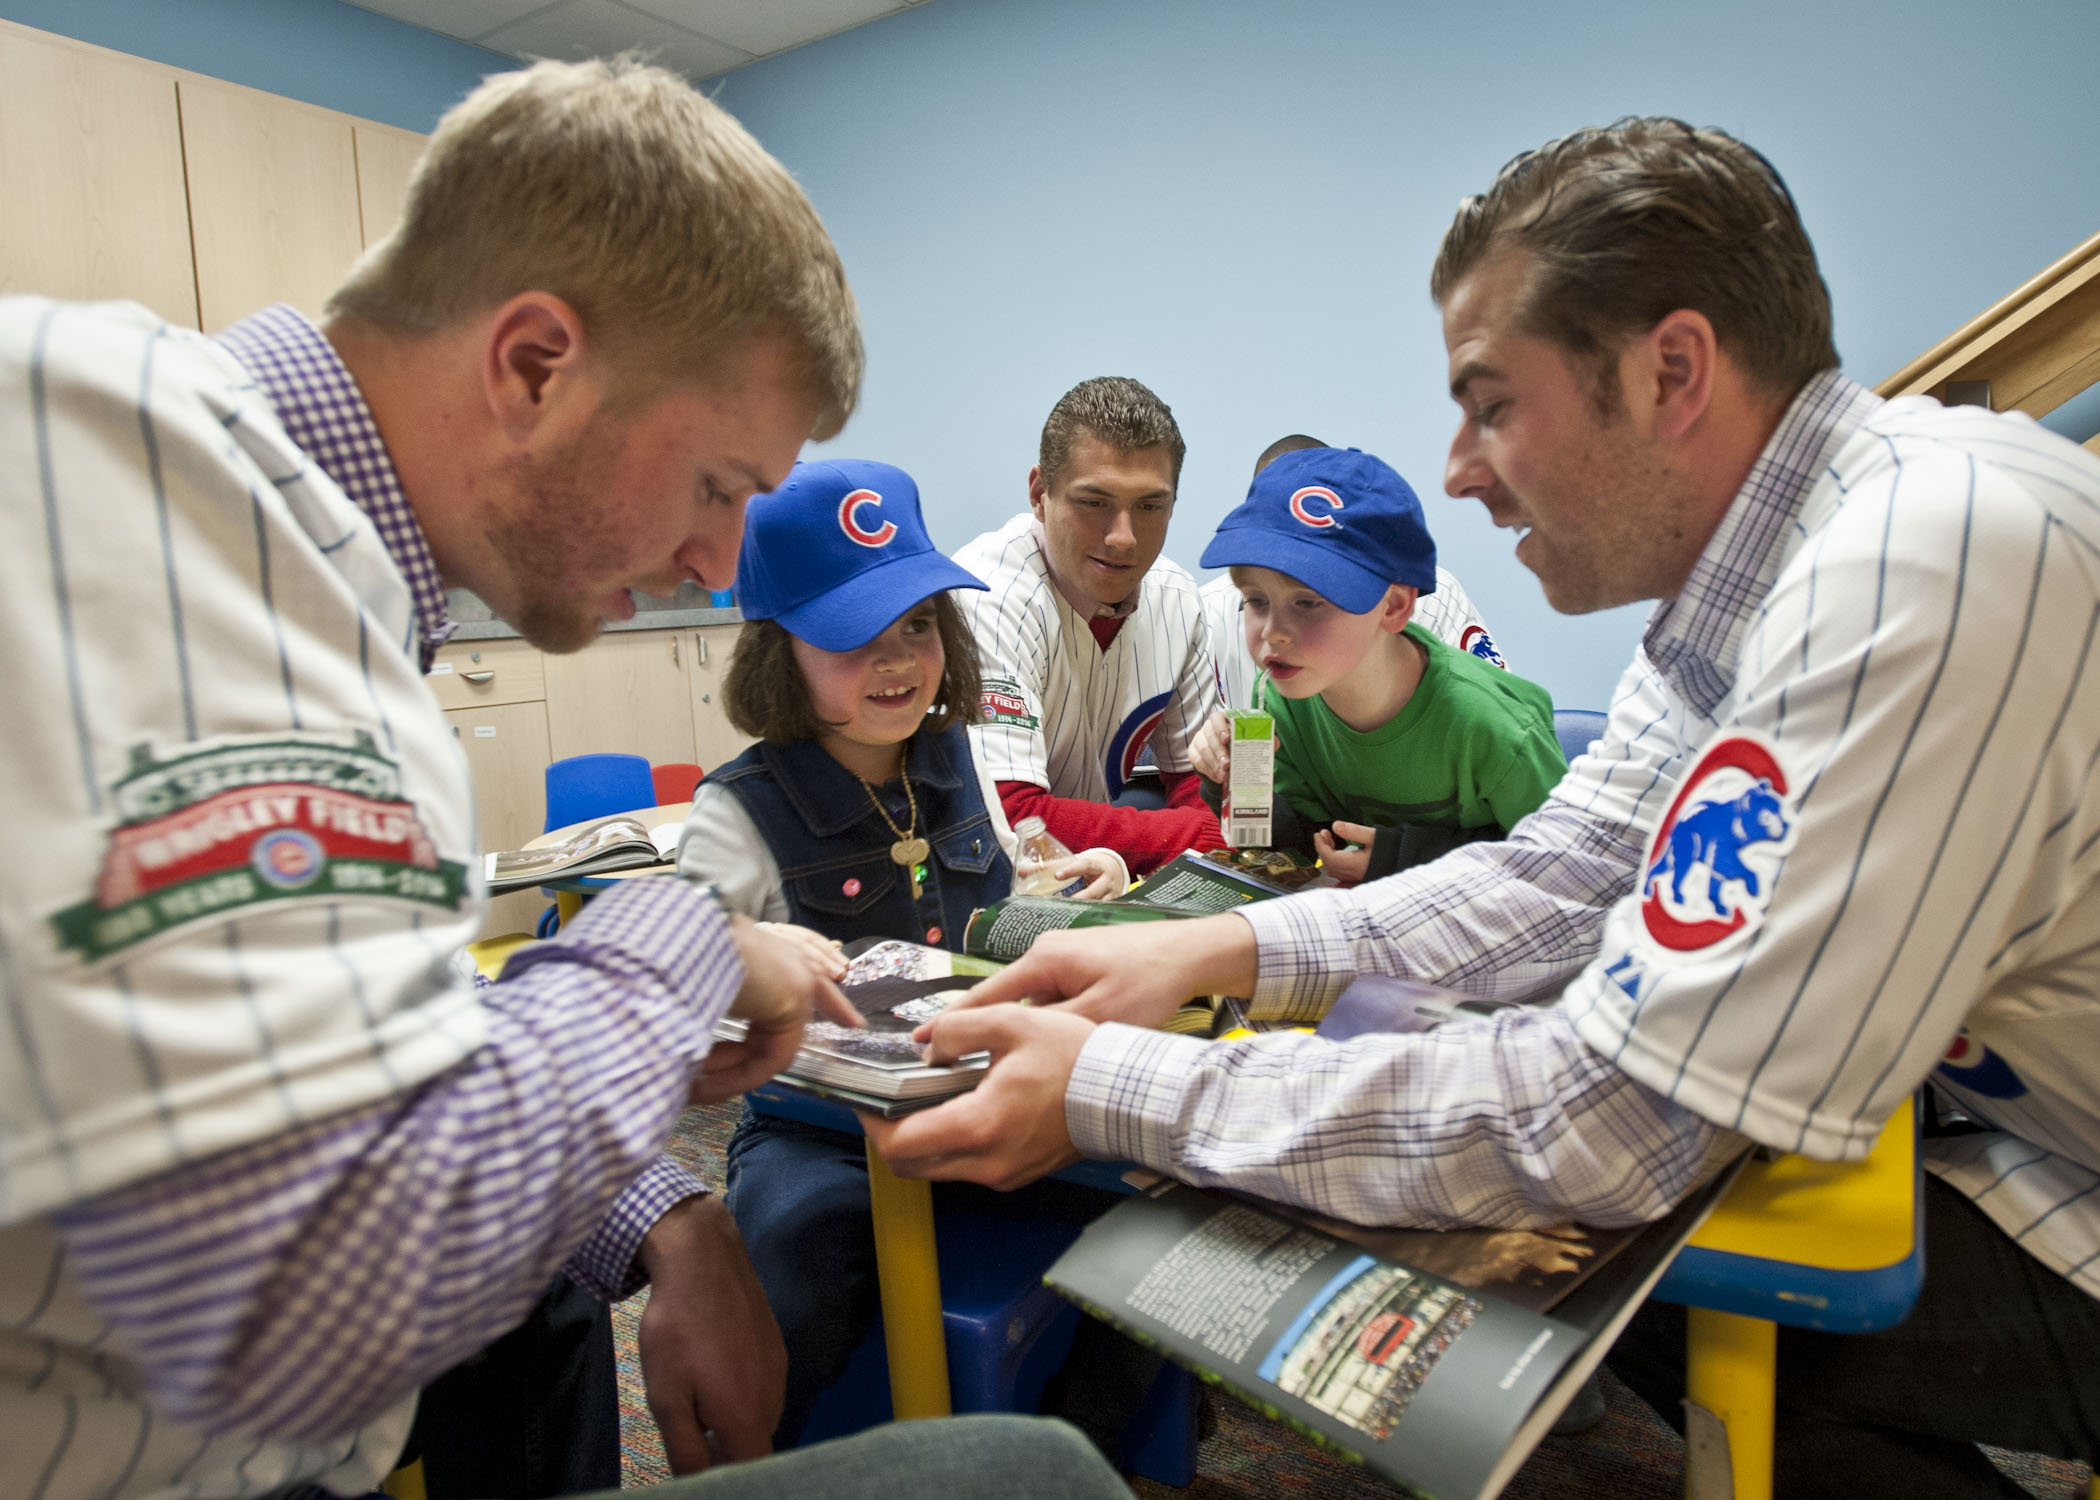 Cubs prospects Eric Jokisch, Albert Almora and Mike Olt hang out with the kids.